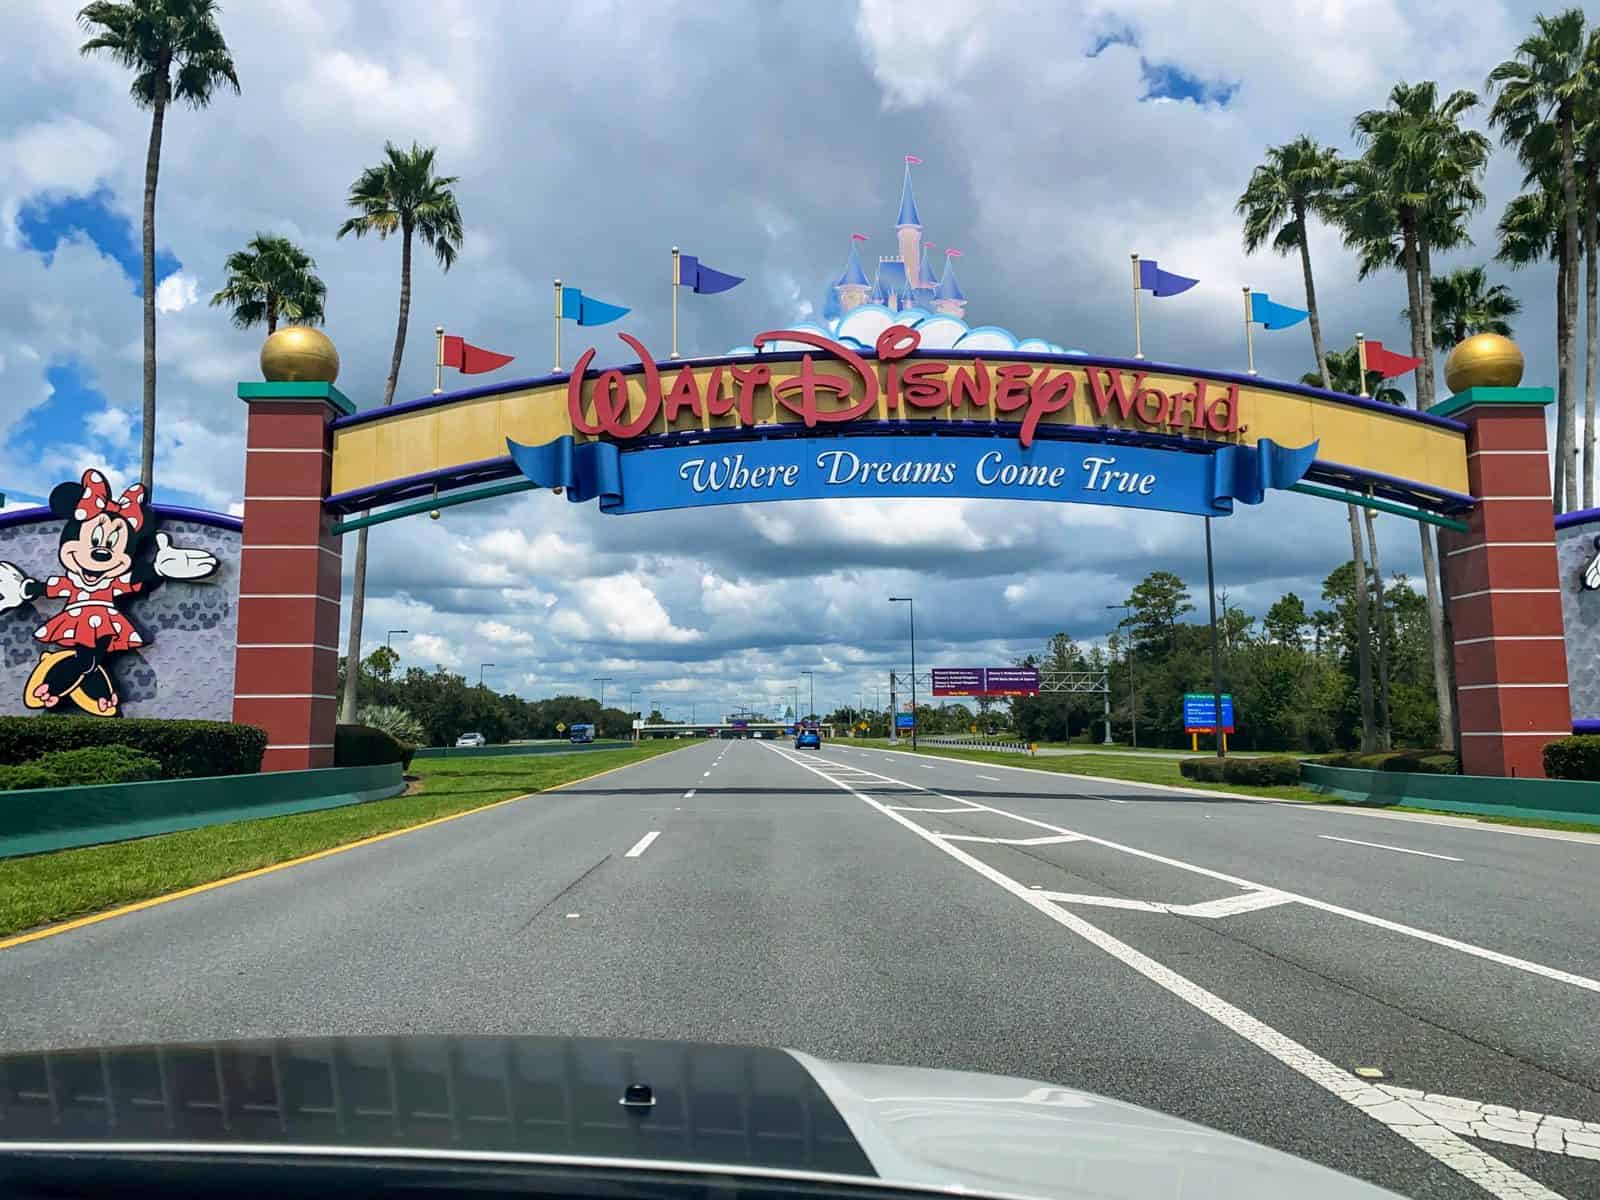 How much does it cost to go to Disney World in 2022 & 2023?